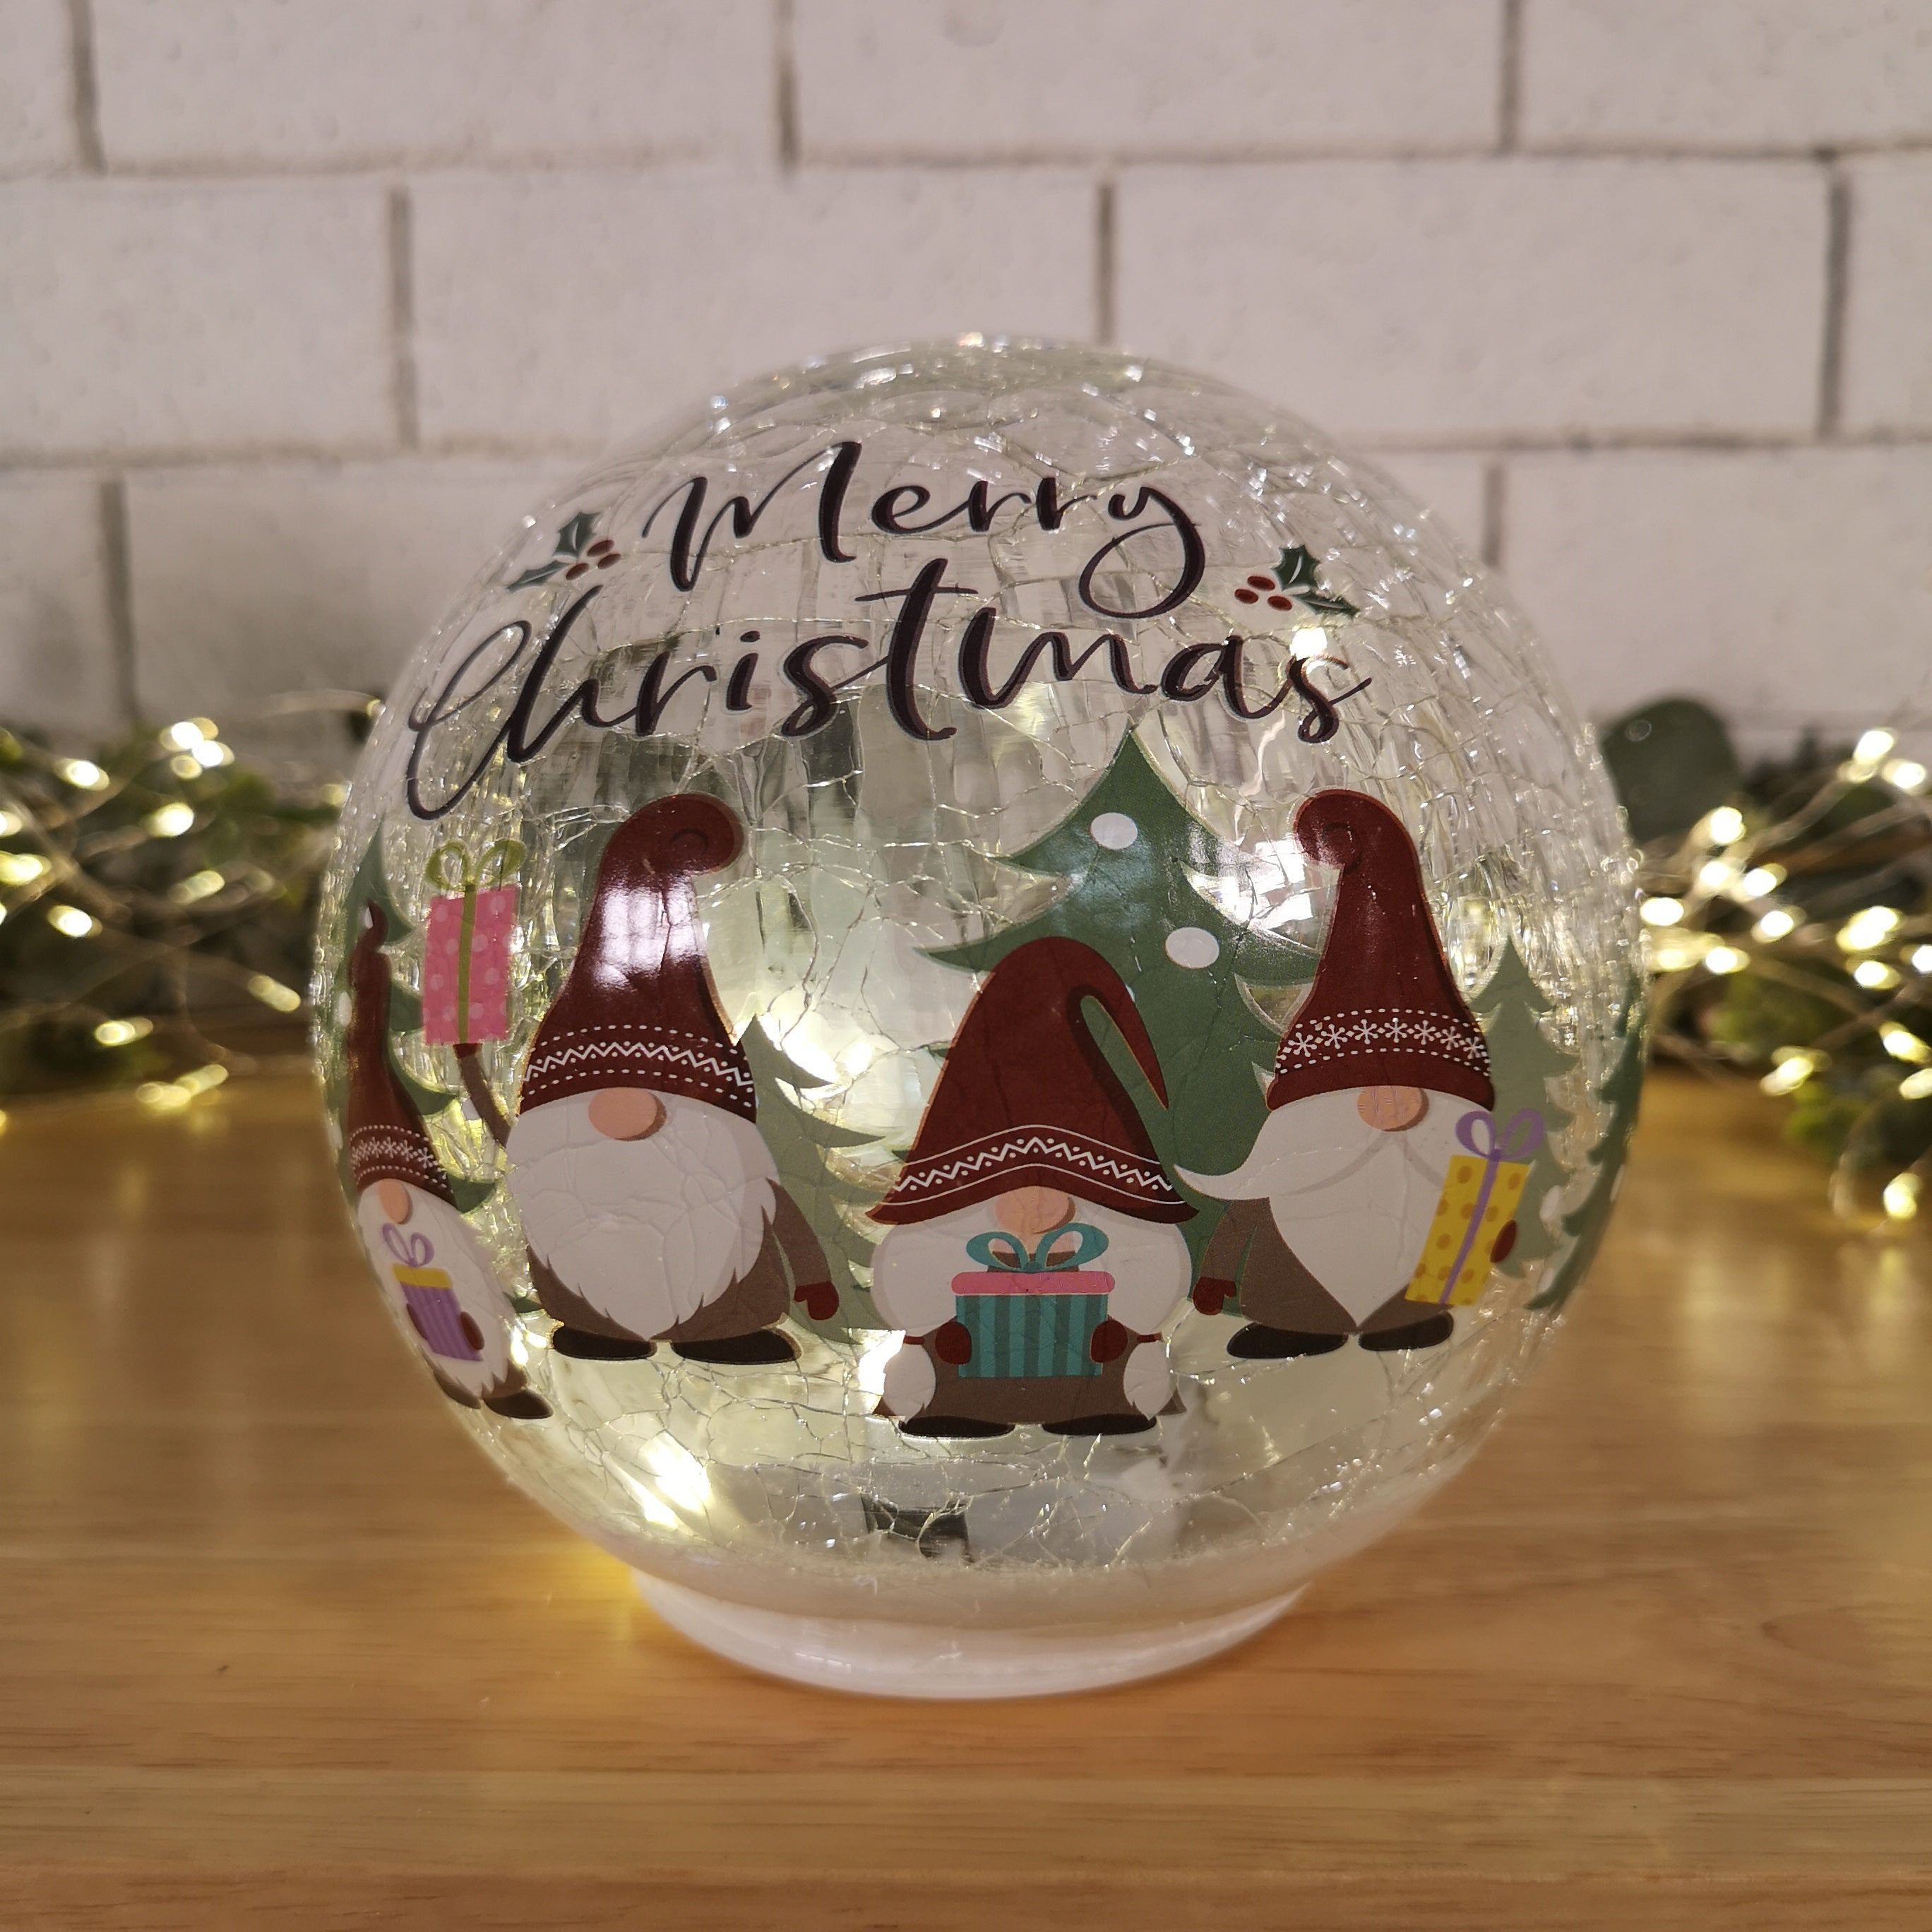 15cm Battery Operated Twinkling Warm White LED Crackle Effect Ball Christmas Decoration with Gonks